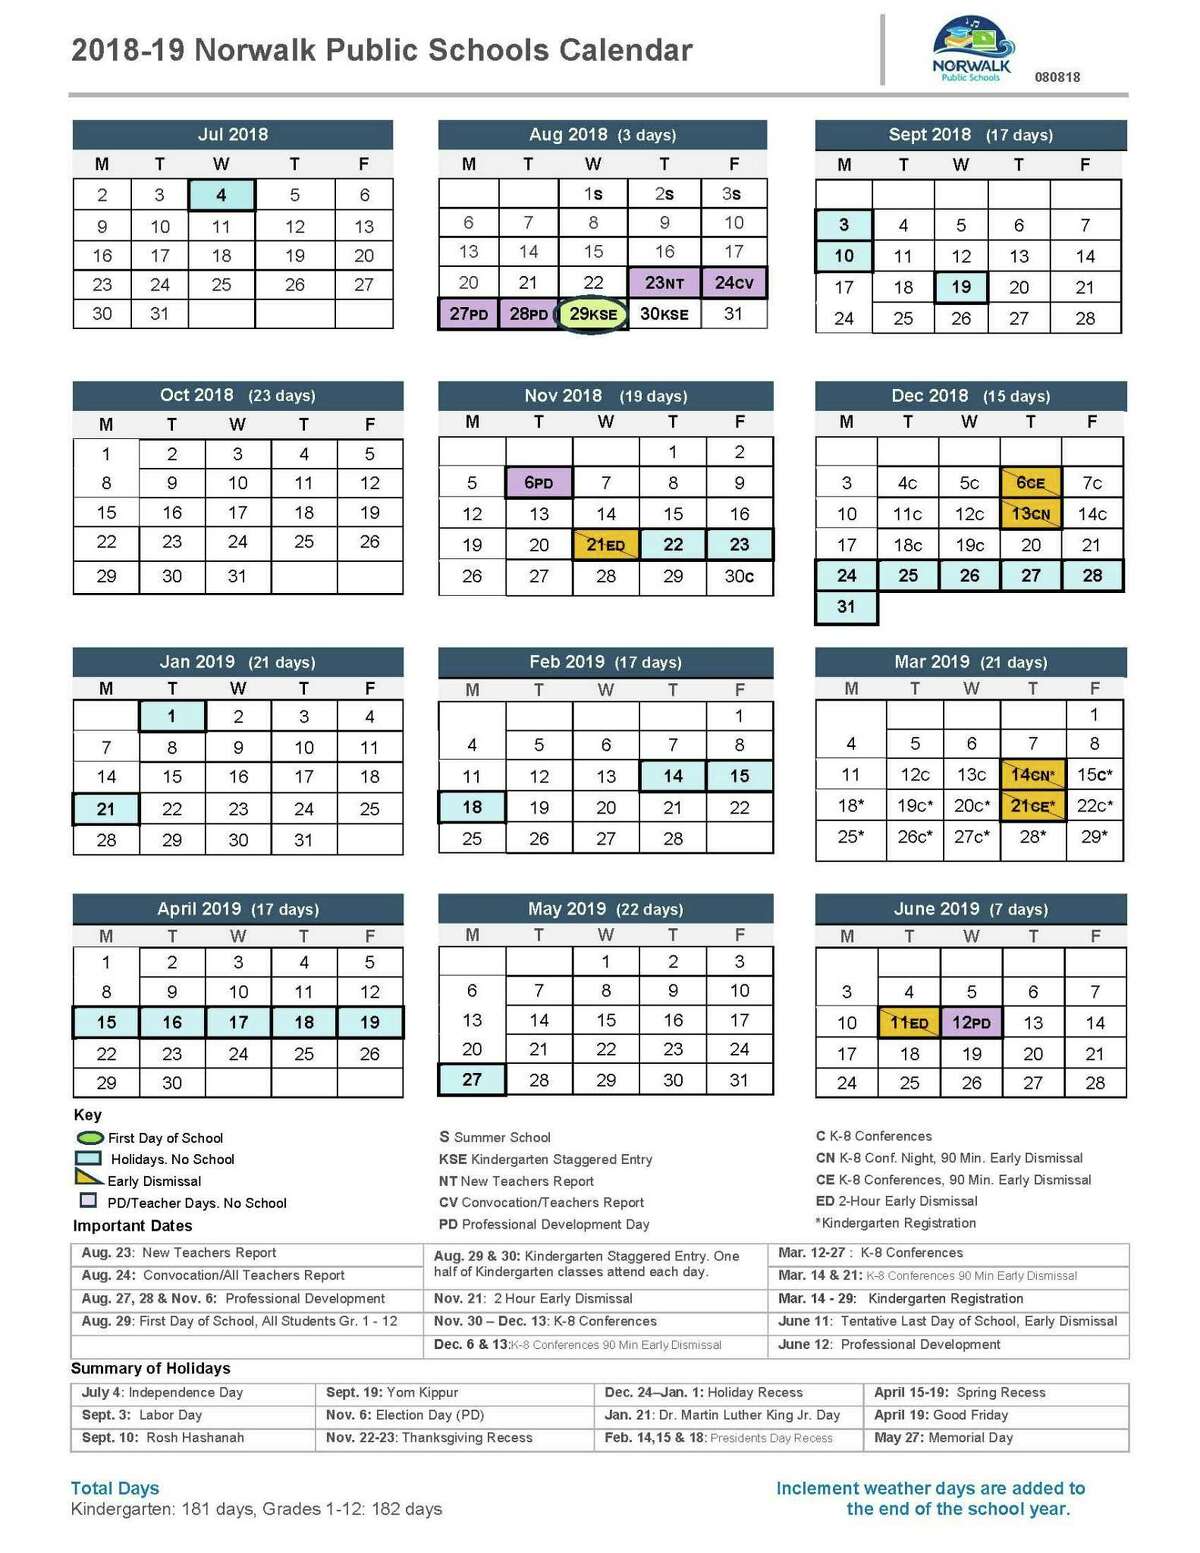 This is the correct version of this school year’s calendar.